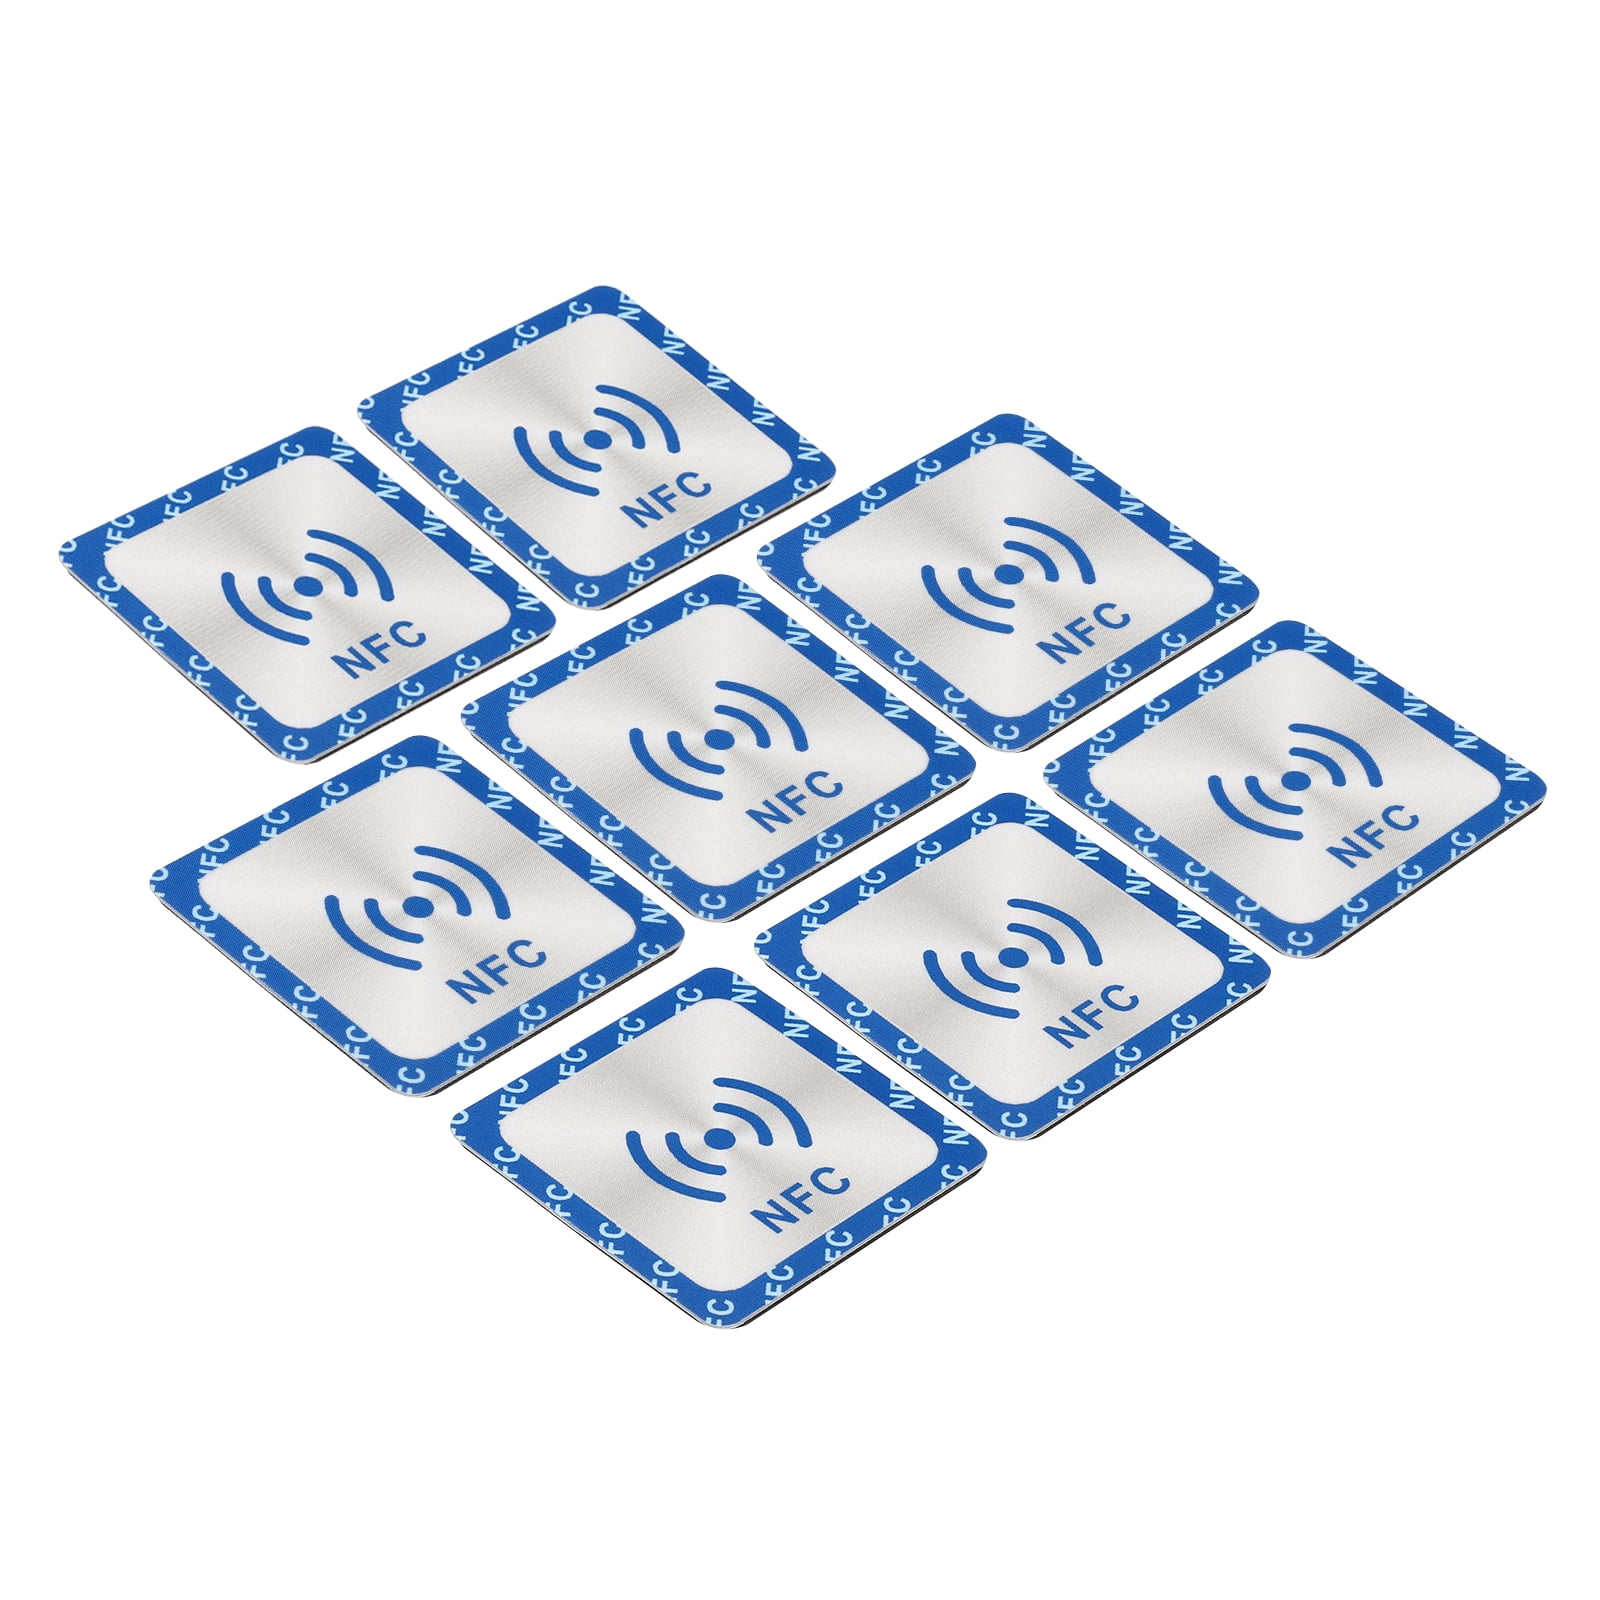 NFC Stickers, 4 Pack Nfc215 Tag Sticker 504 Bytes Memory Fully Programmable Square NFC Tags for Phone, NFC-Enabled Devices, Blue | Harfington